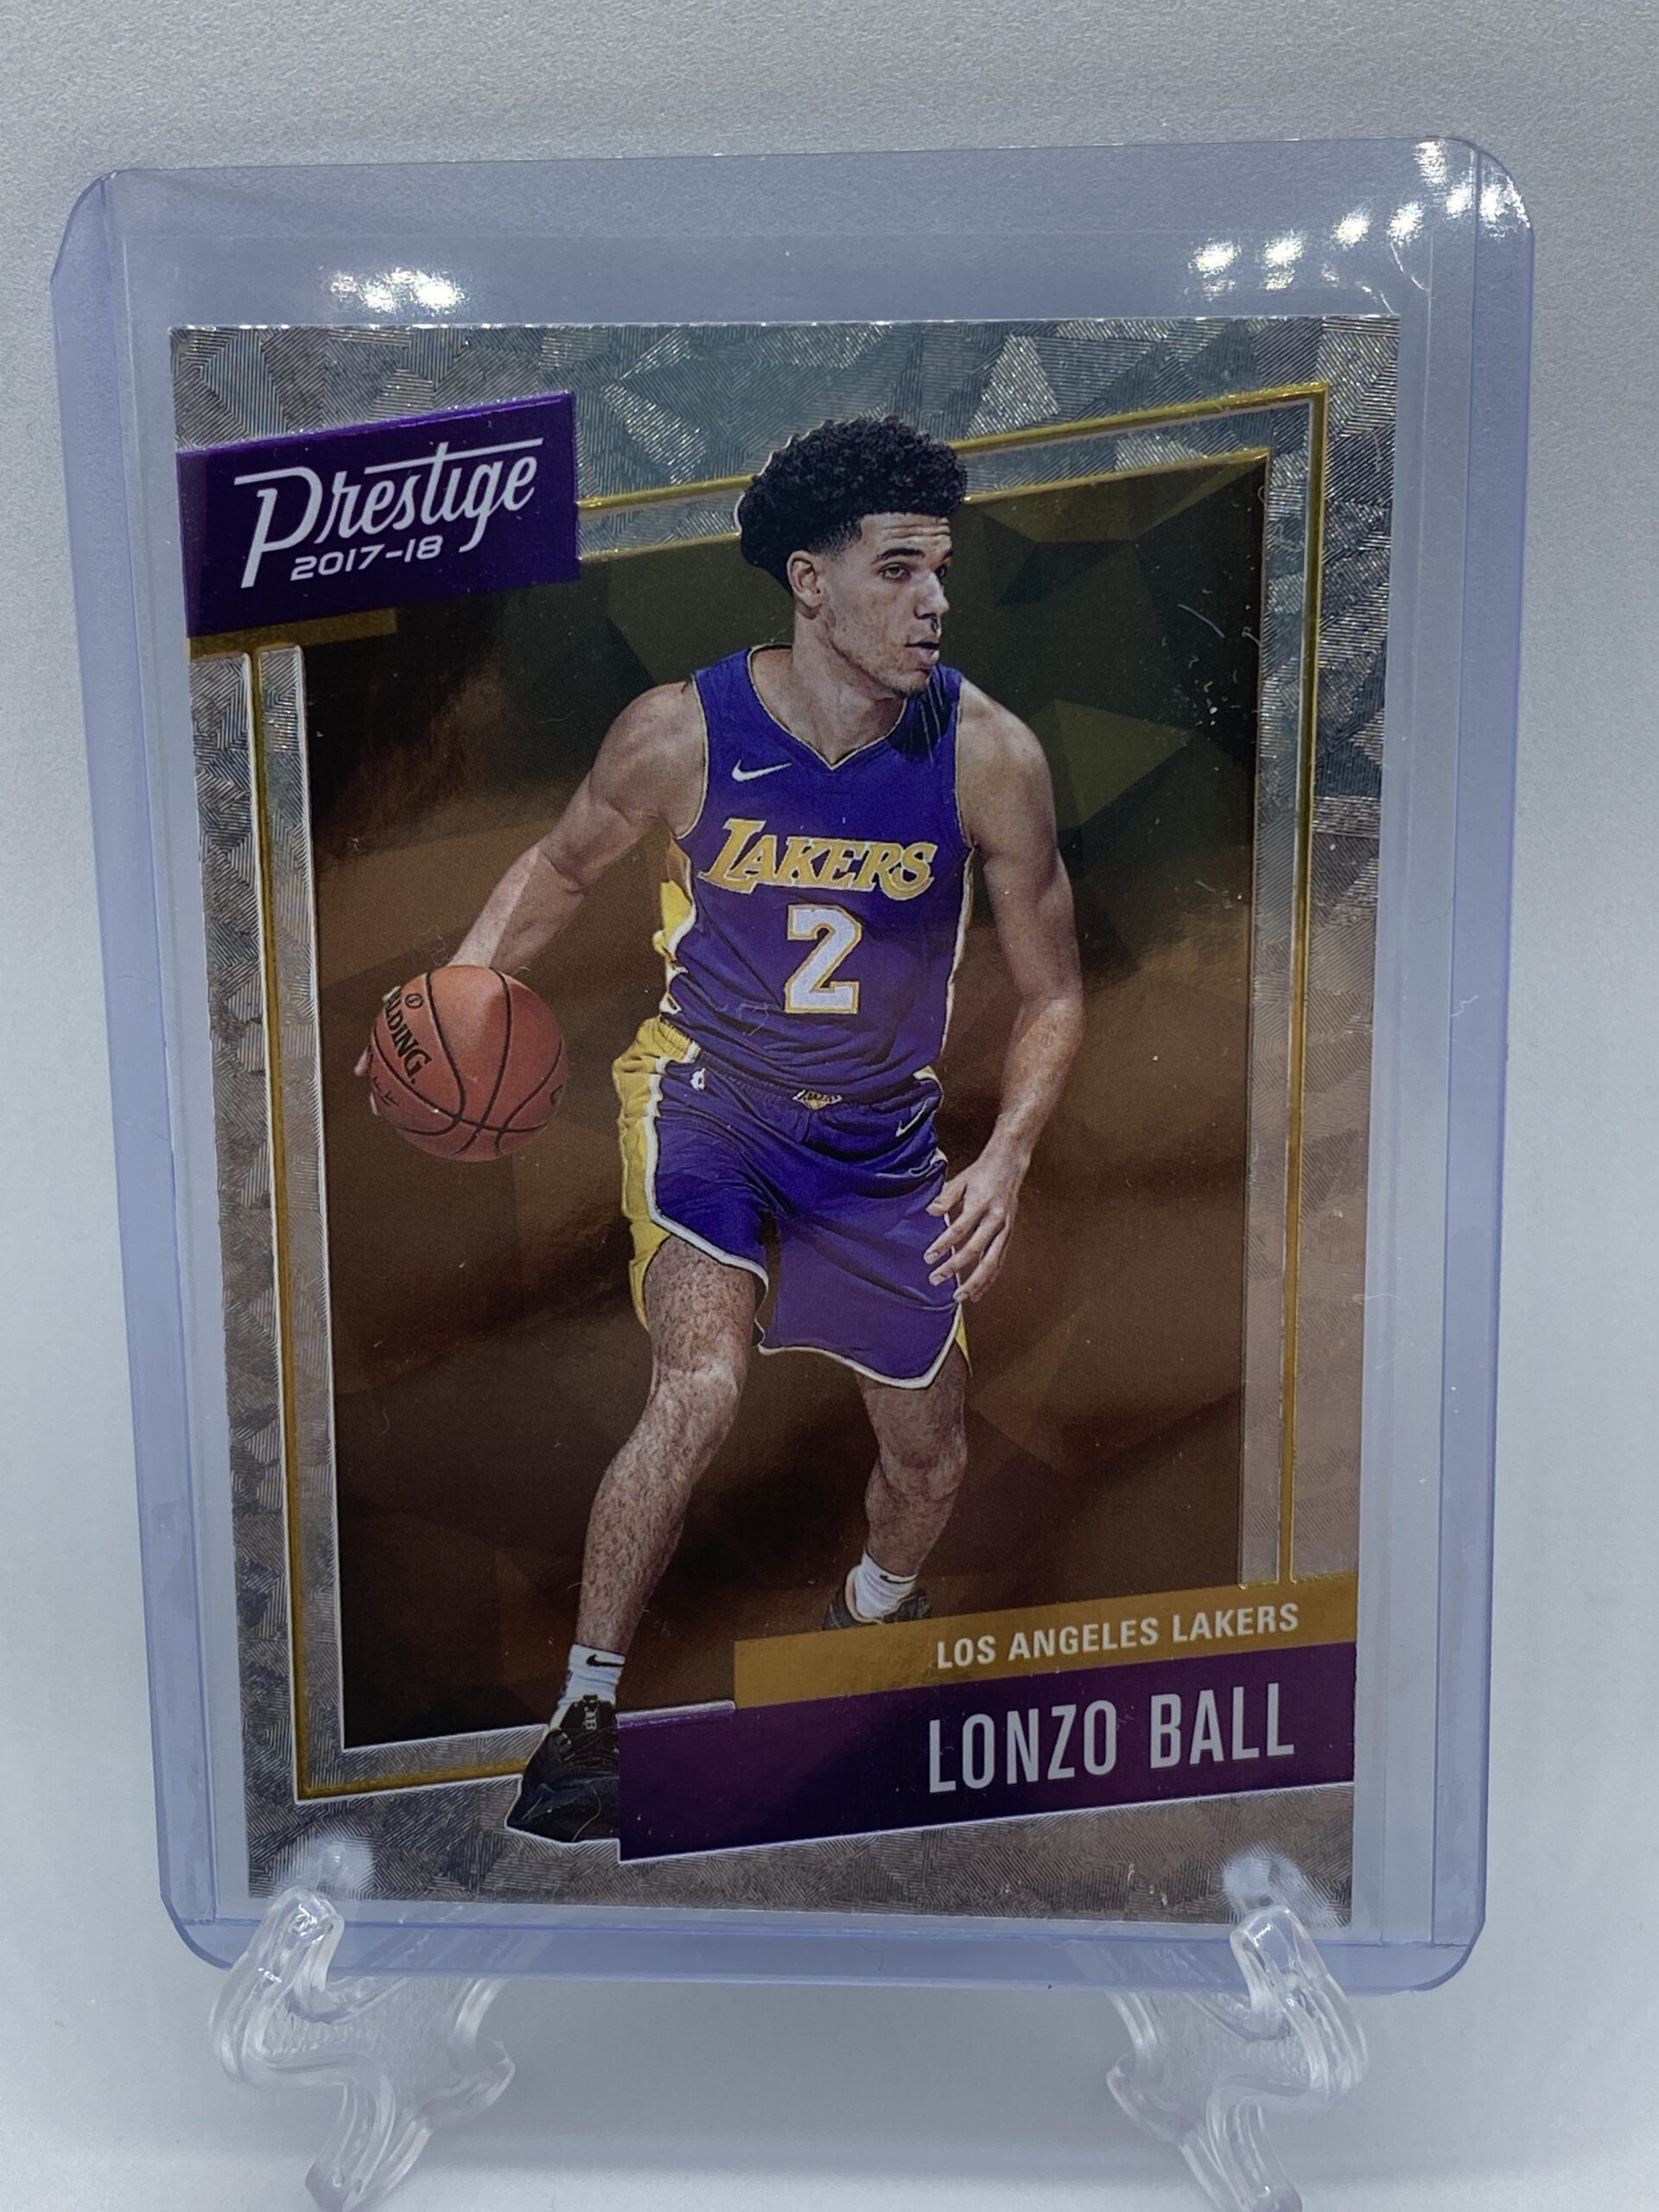 Lonzo Ball Prestige Rookie Card: Silver Boarder - Owls Collectibles - Trusted American Sports Cards & Toy Supplier Located In Delray Beach, Florida